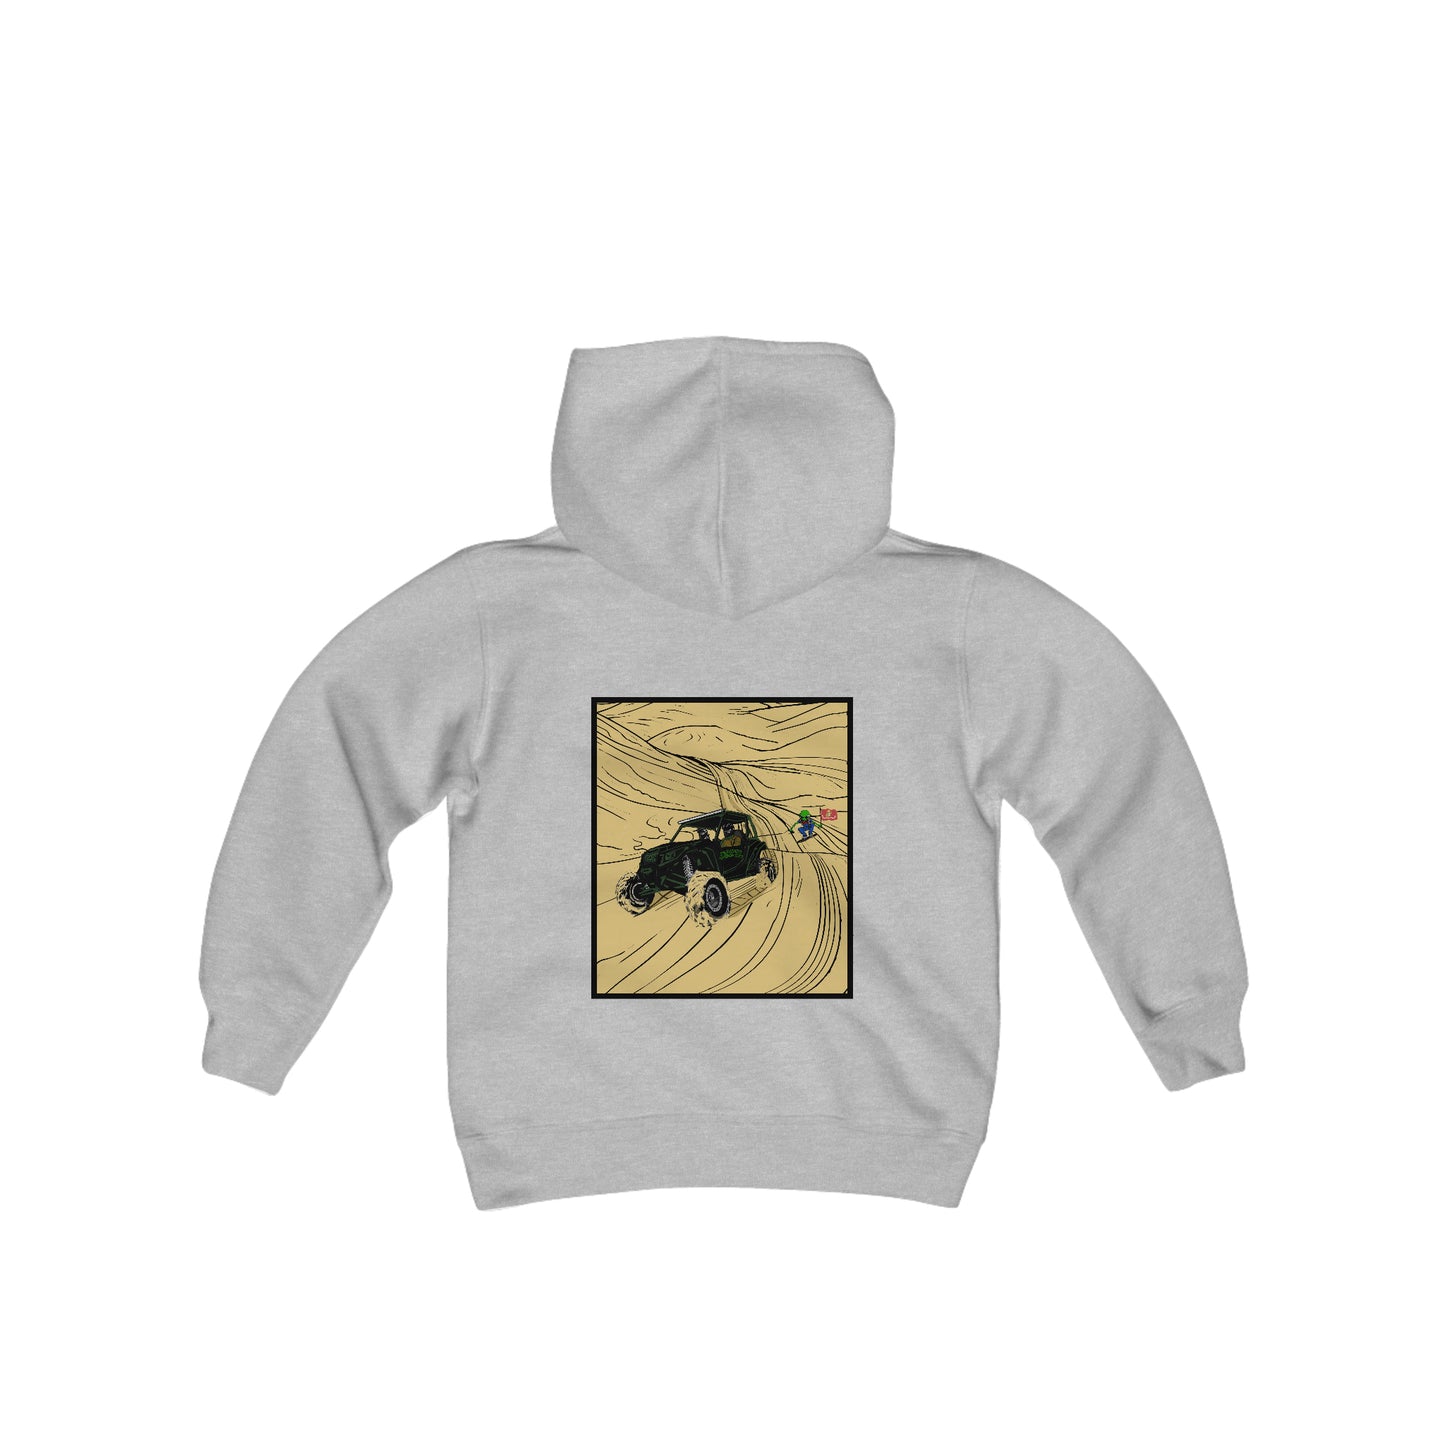 Dune Goons Offroad Krew Youth Hoodie